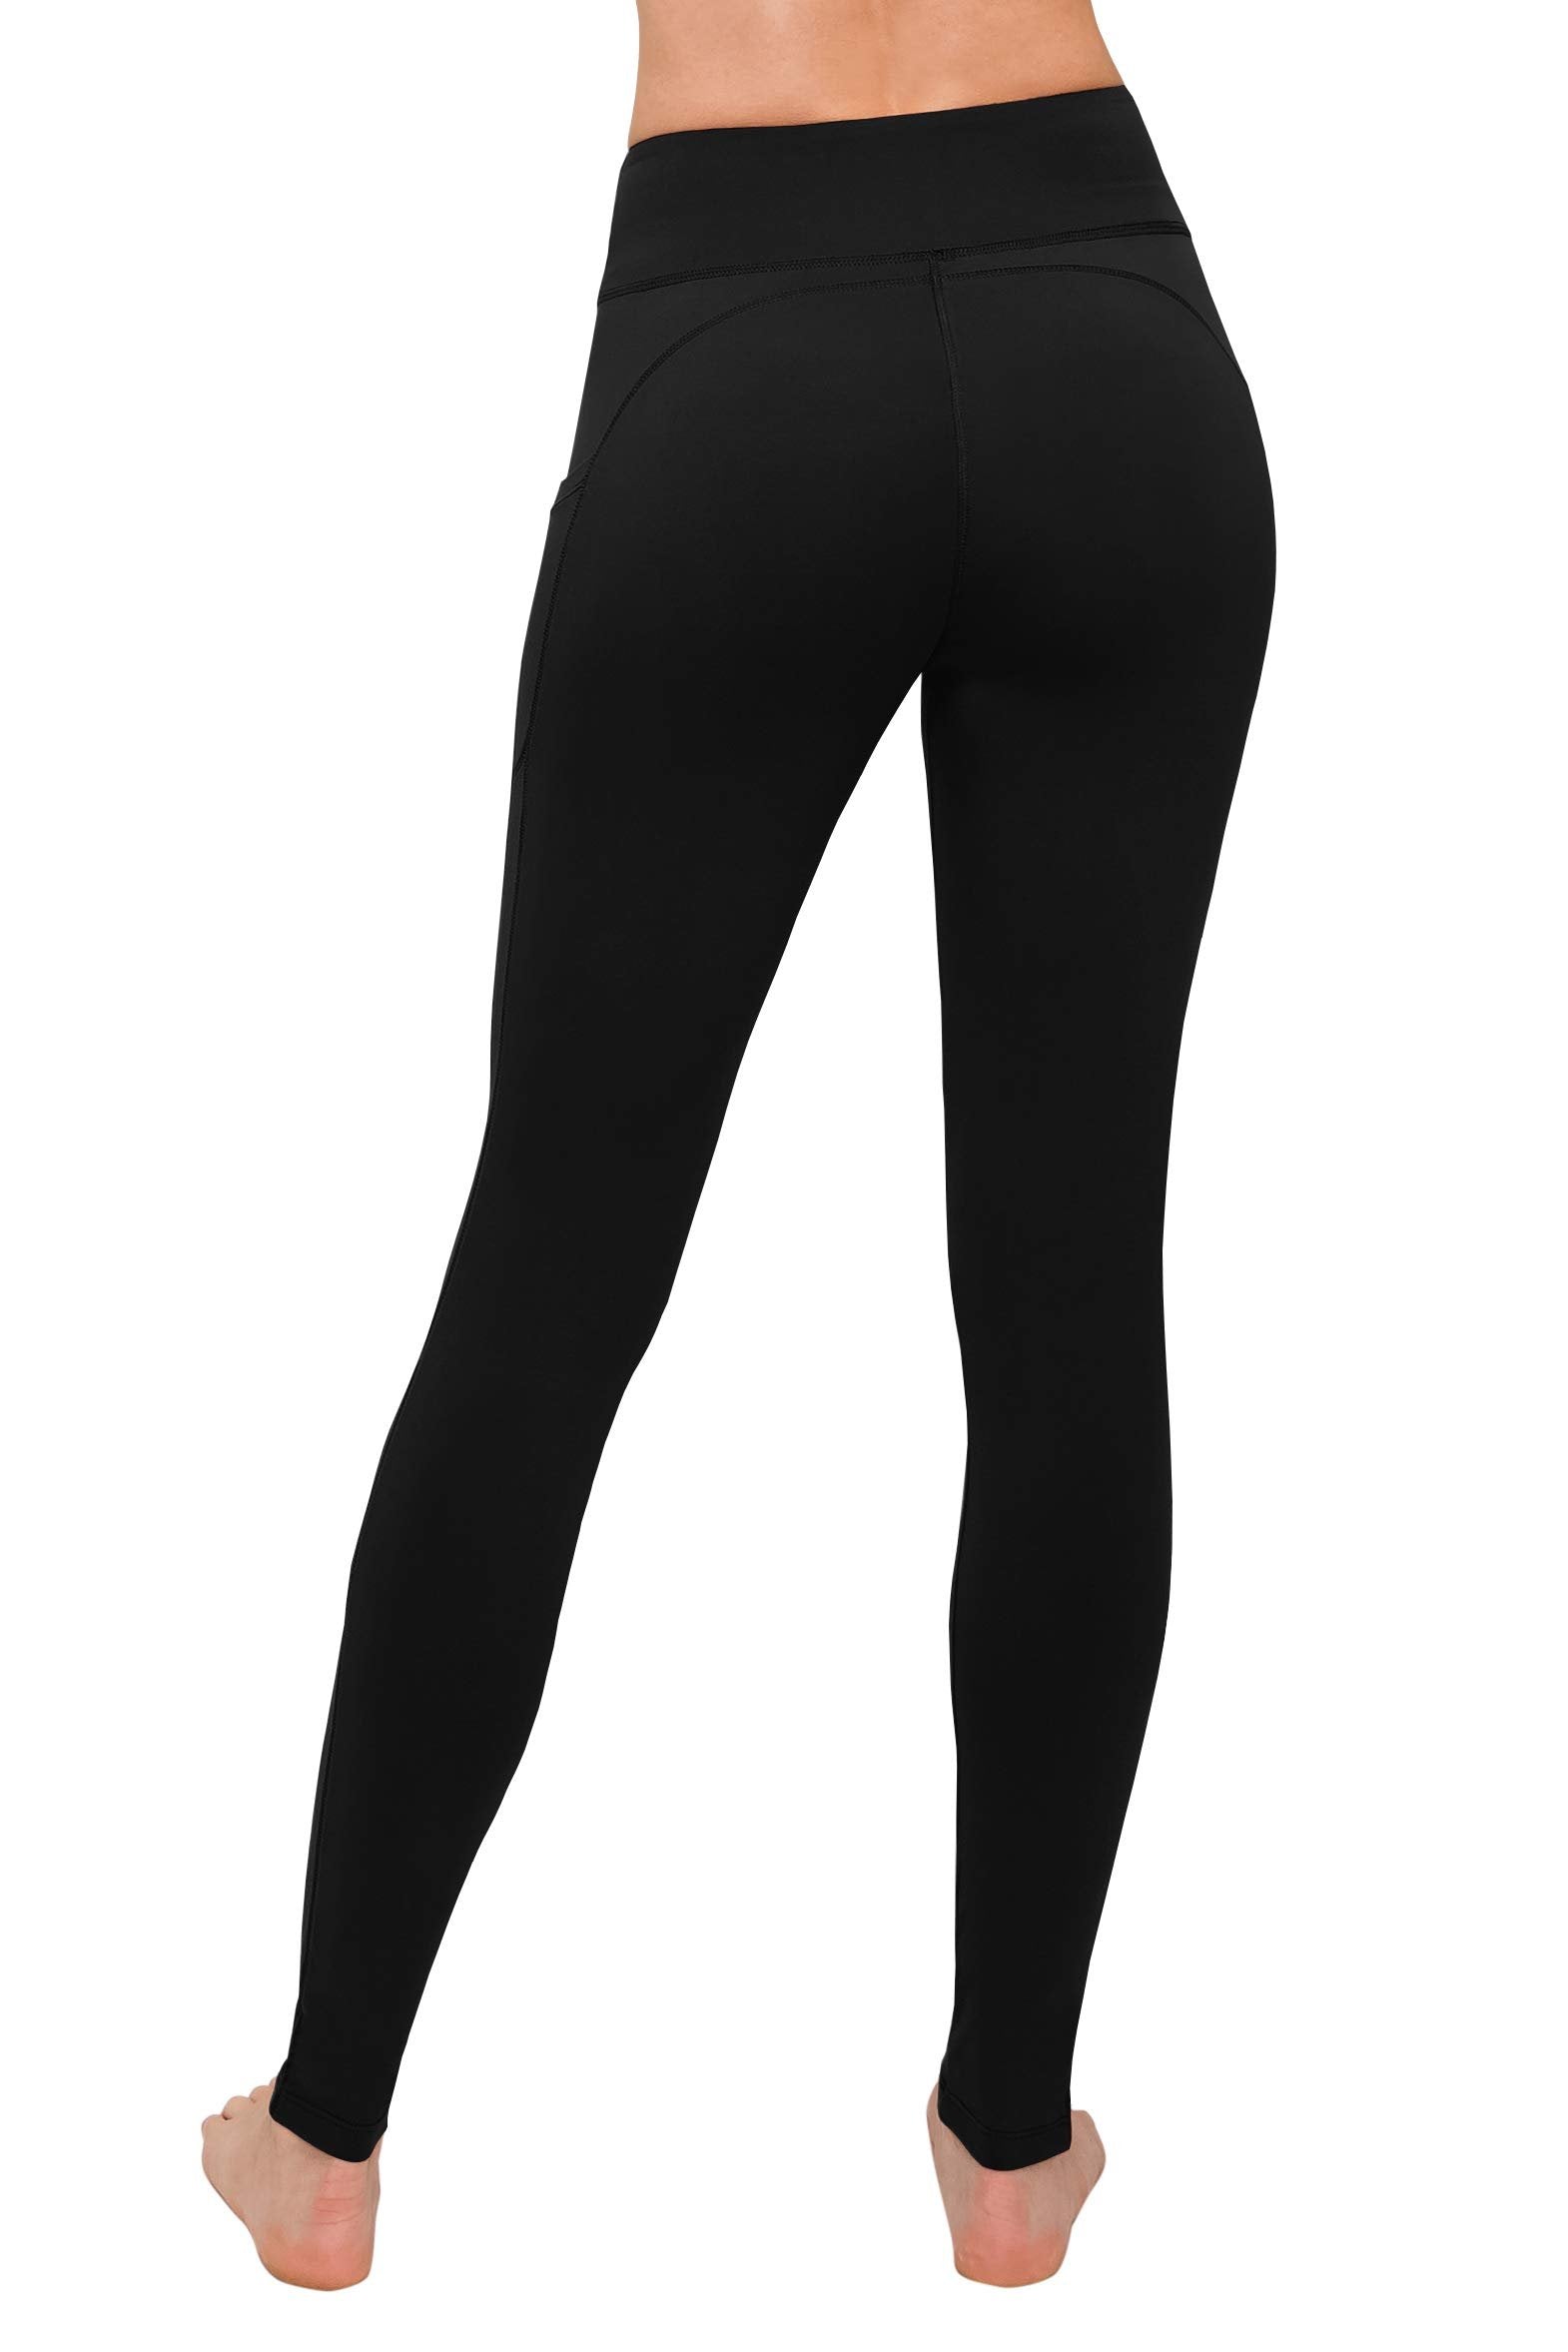 SATINA High Waisted Leggings with Pockets for Women - Workout Leggings for Regular & Plus Size Women - Black Leggings Women - Yoga Leggings for Women |3 Inch Waistband (Plus Size, Black)